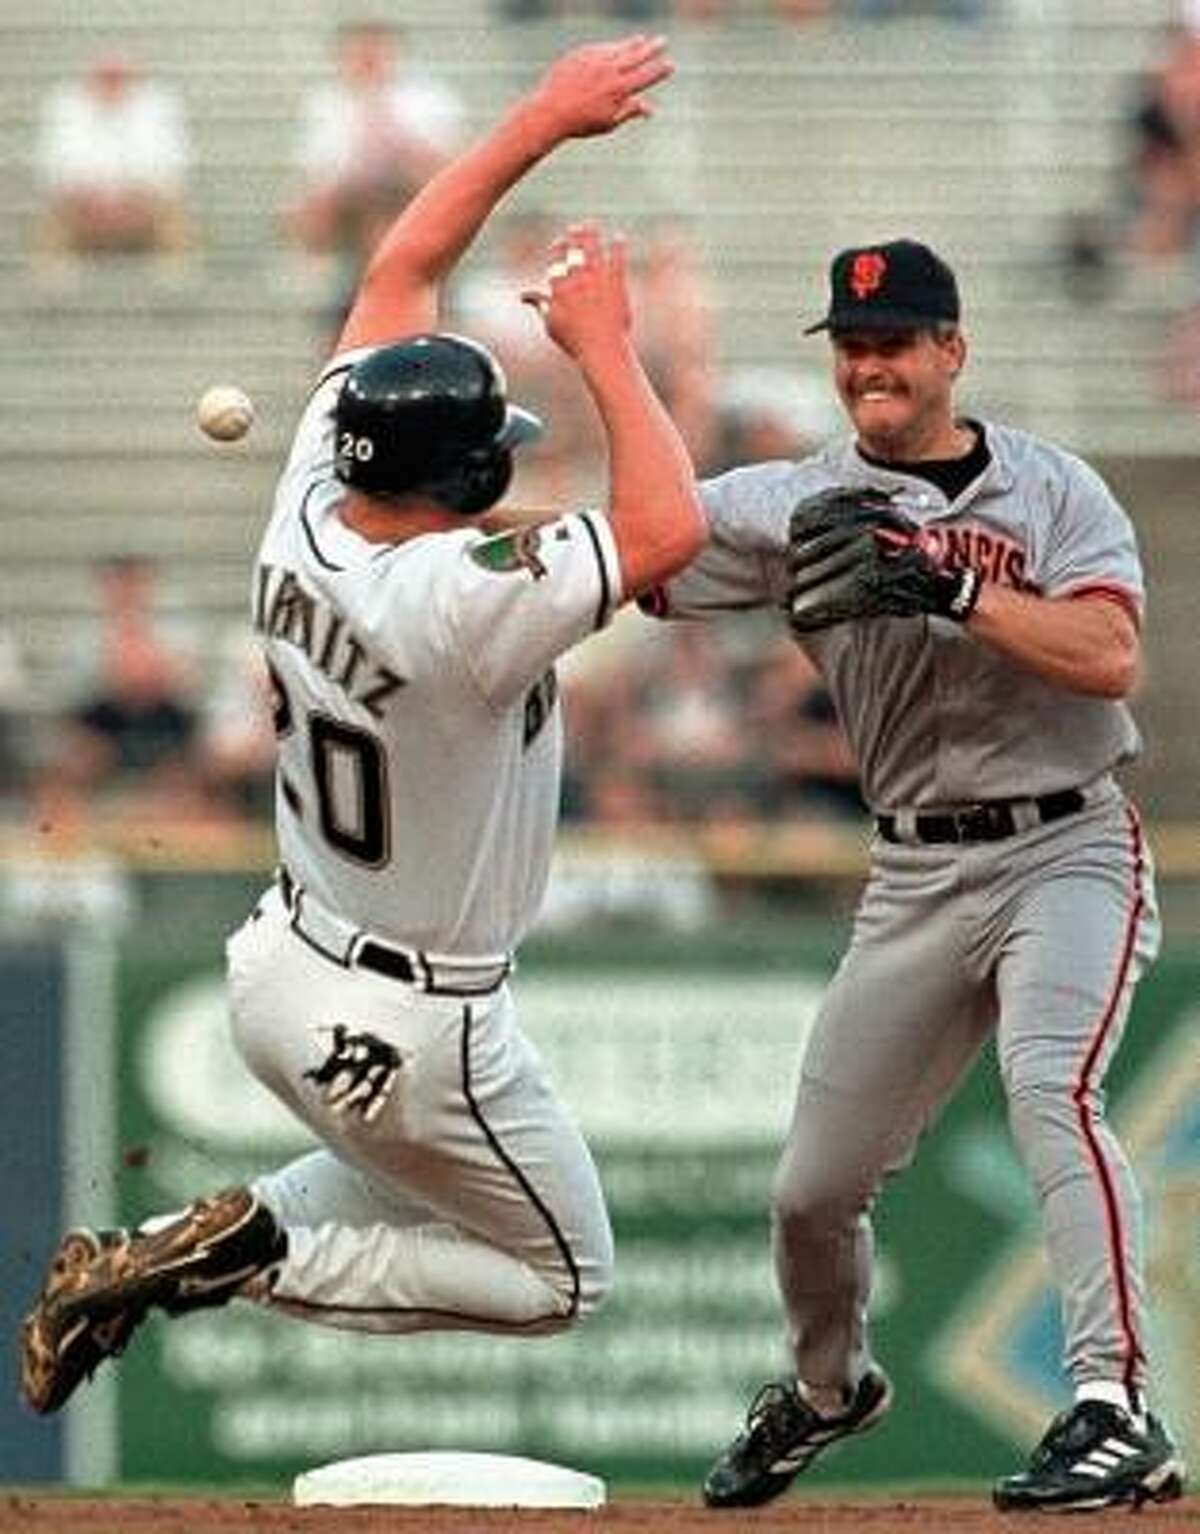 1998: Jeff Kent (right), who broke into the major leagues with the Toronto Blue Jays in 1992, had one of the best seasons of his career with the San Francisco Giants, hitting .297 with 31 homers and a career-high 128 RBIs. This was one season after hitting 29 homers and driving in 121 runs in his first season with the Giants.